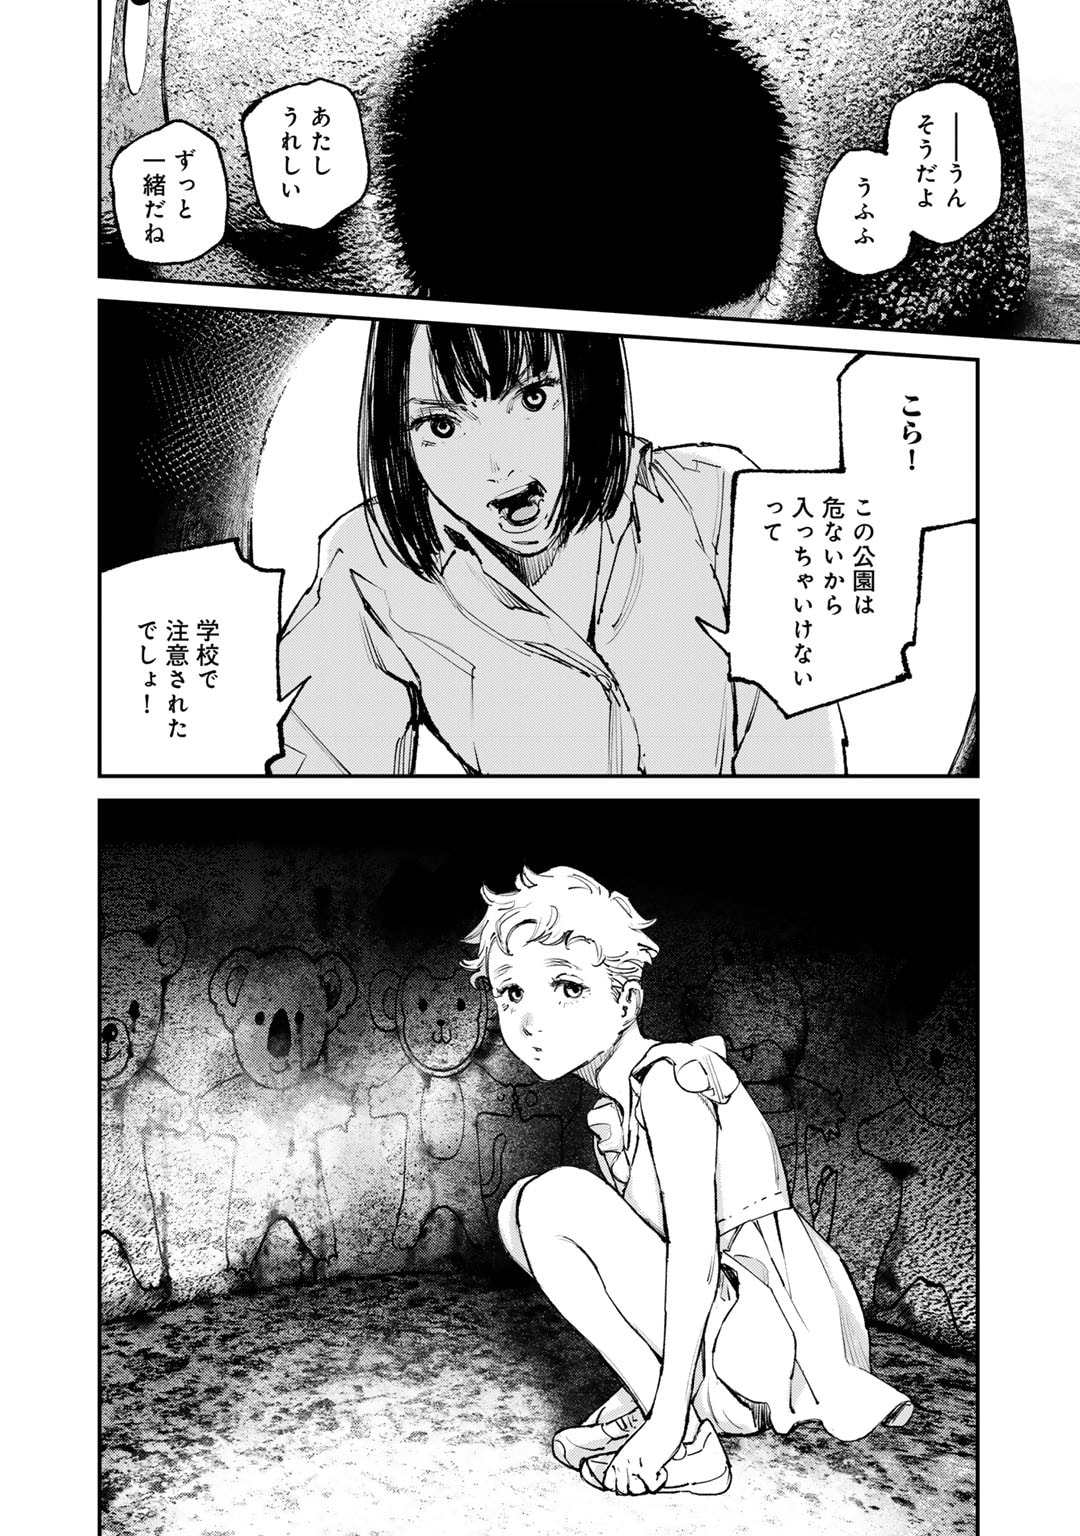 Kanata Is Into More Darker - Chapter 1 - Page 26